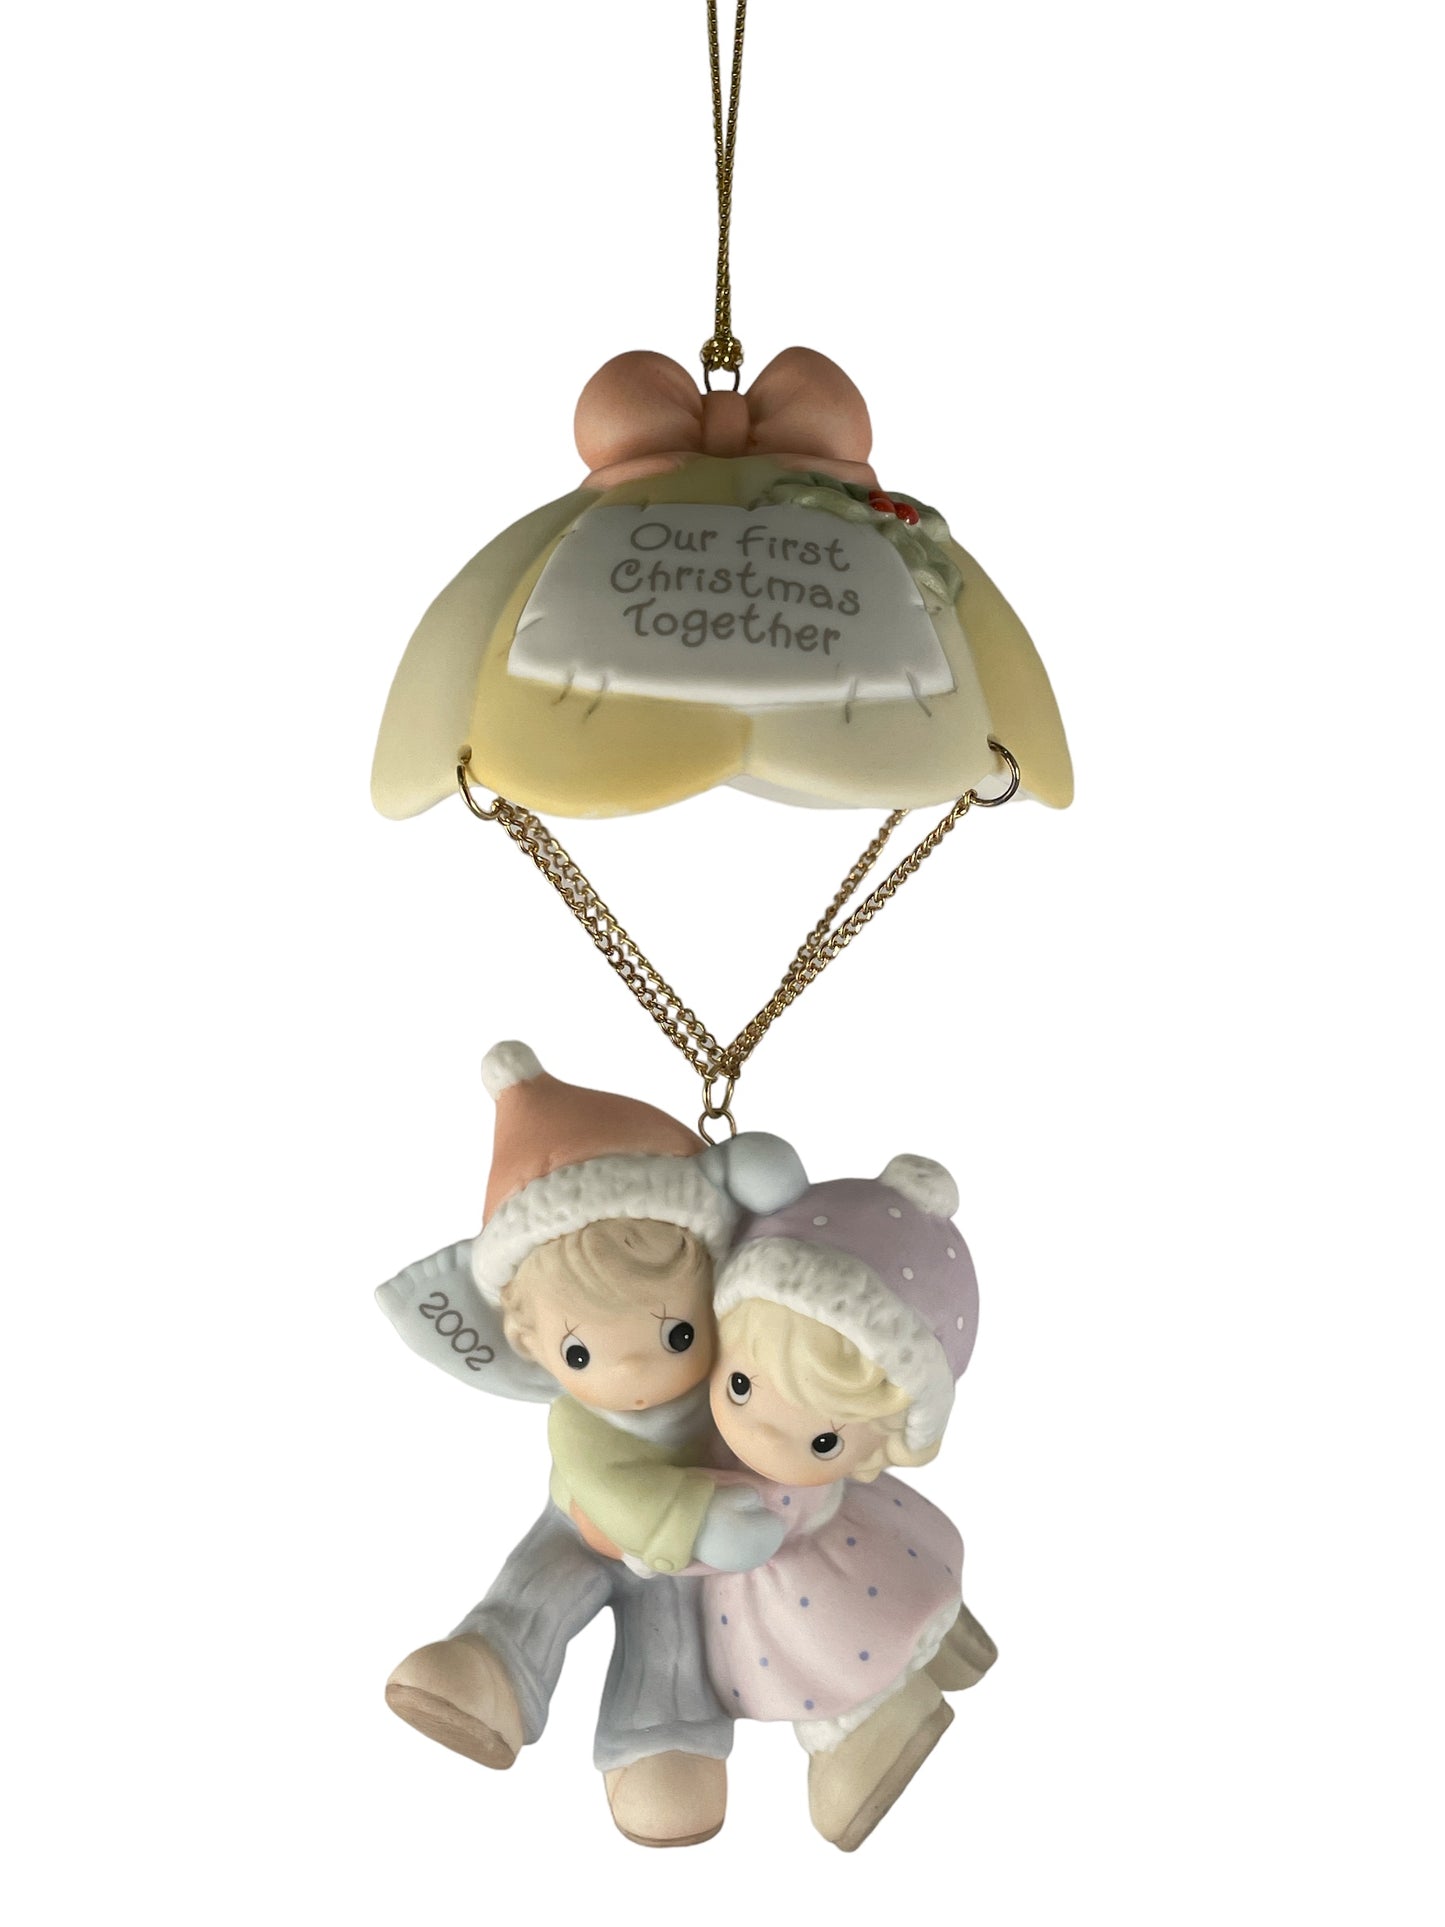 Our First Christmas Together 2002 - Precious Moments Ornament 104207